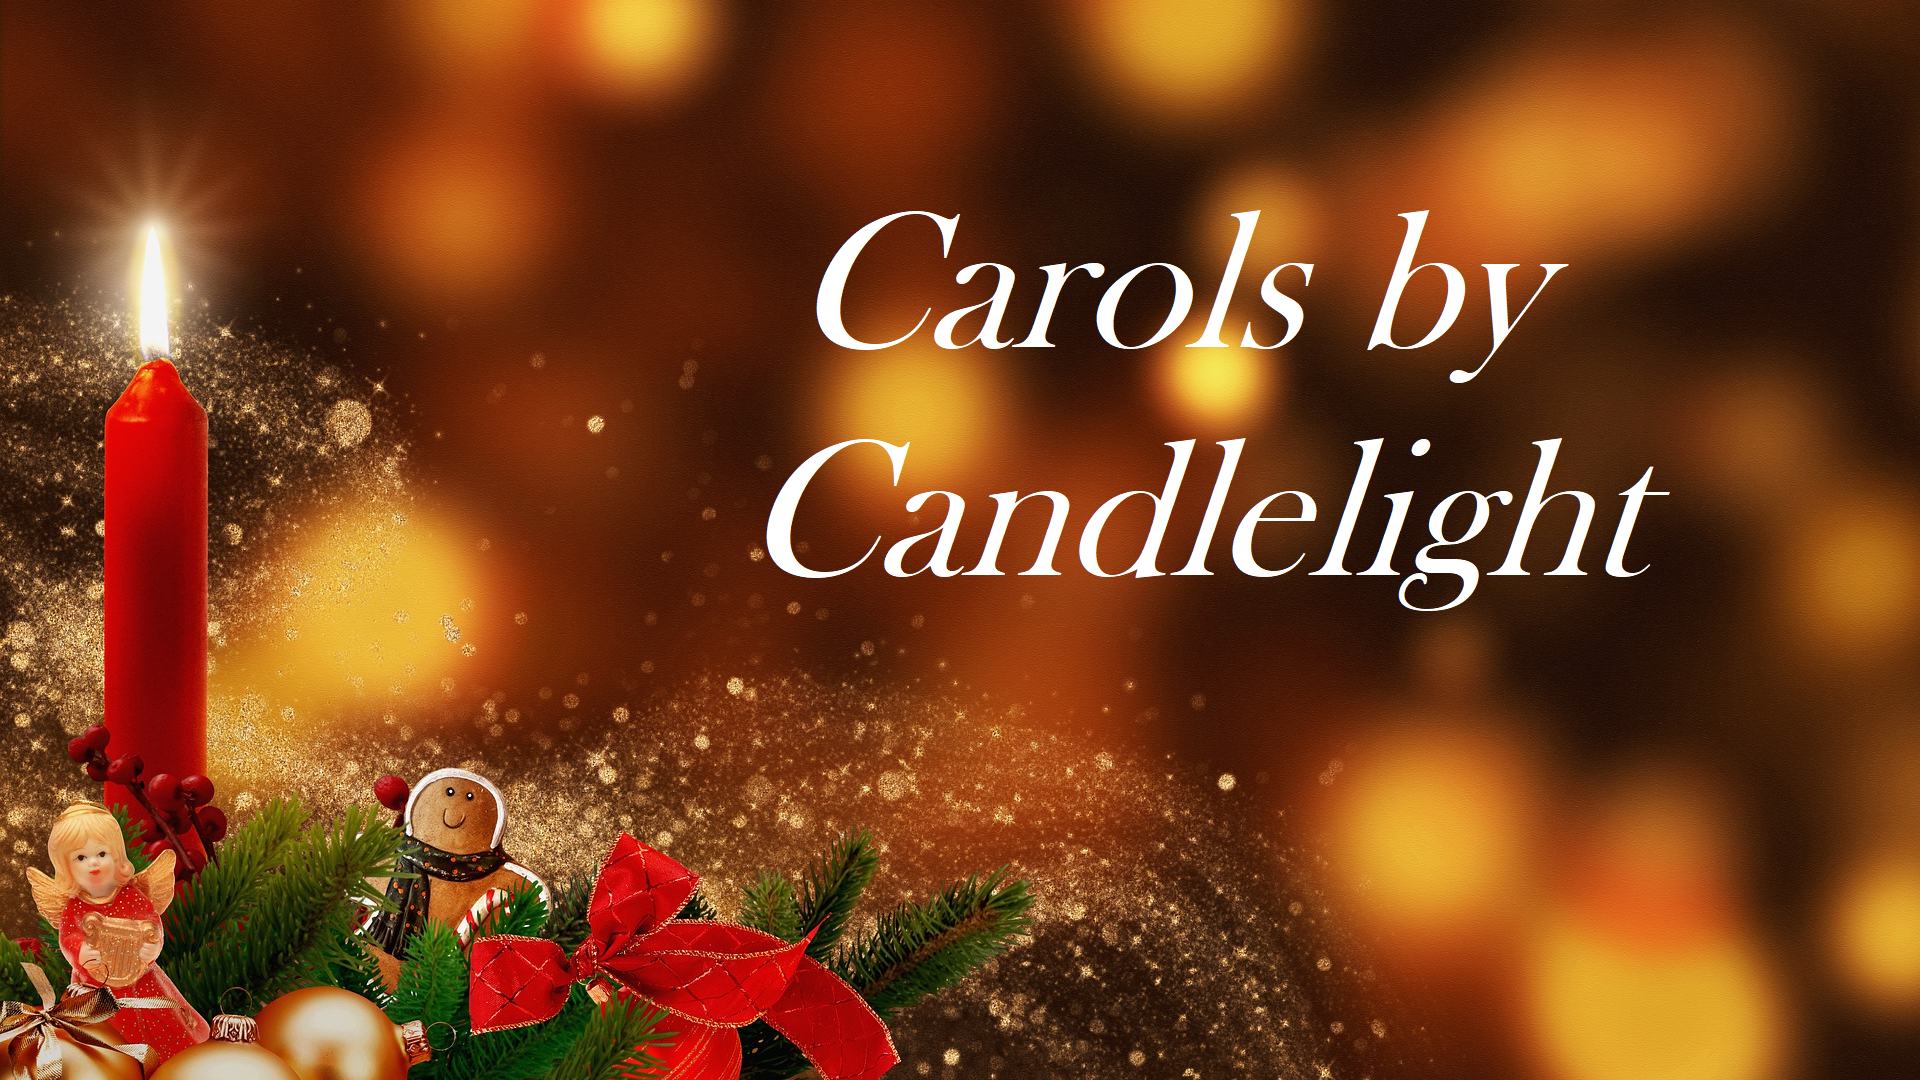 Candle display with Carols by Candlelight text superimposed